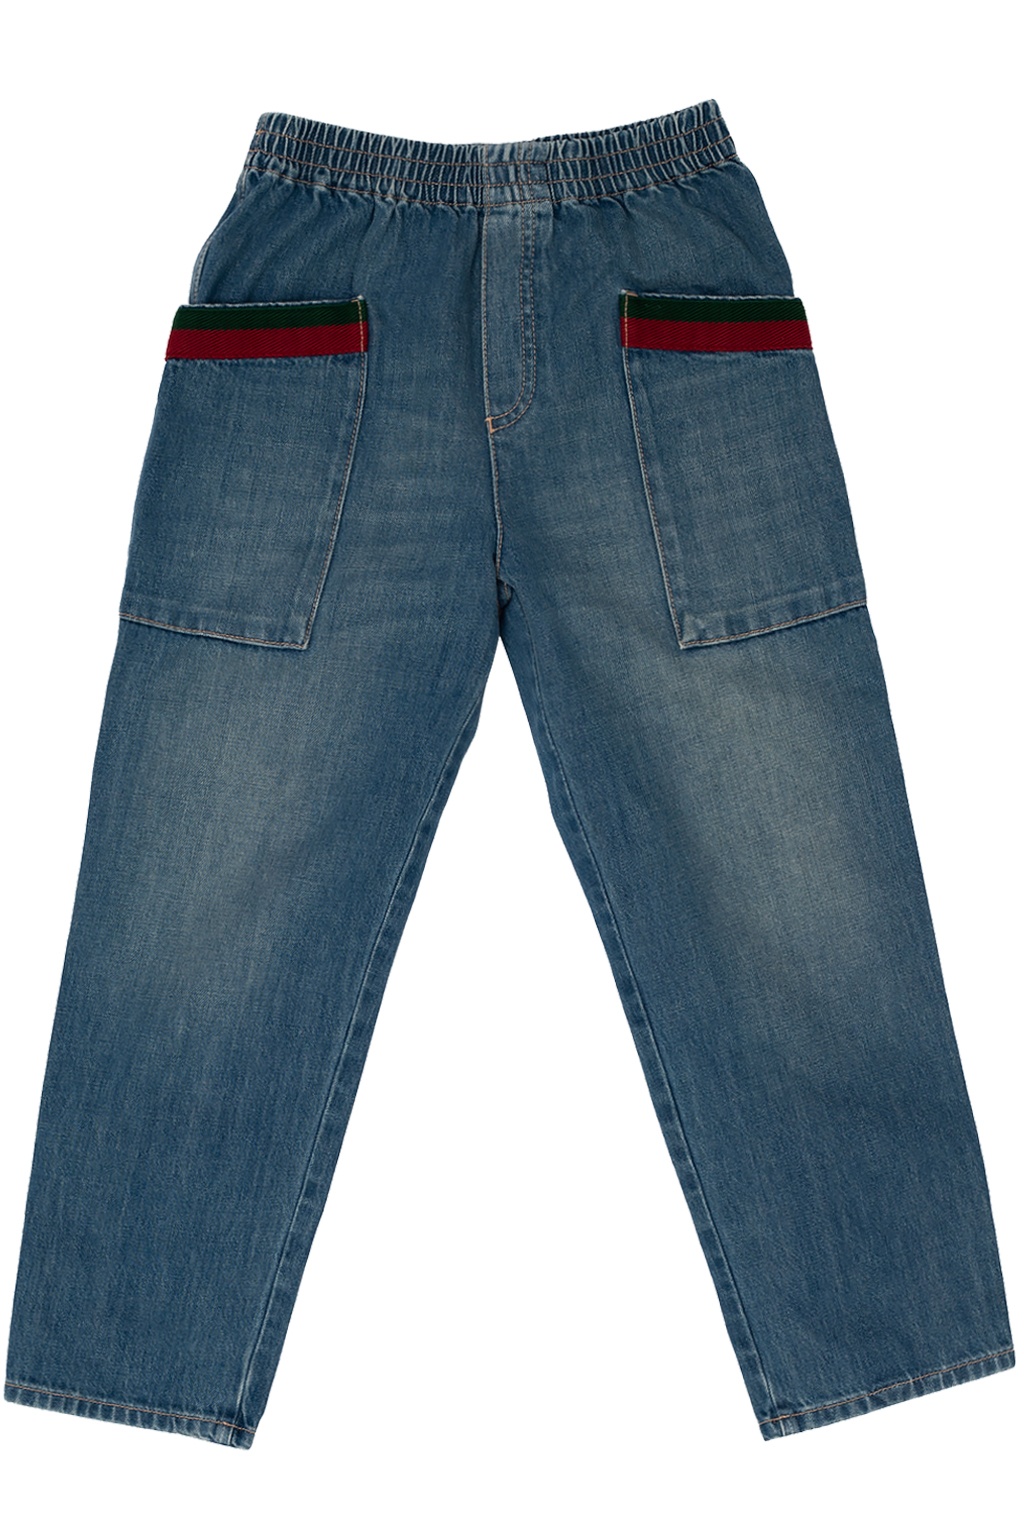 gucci jeans for kids